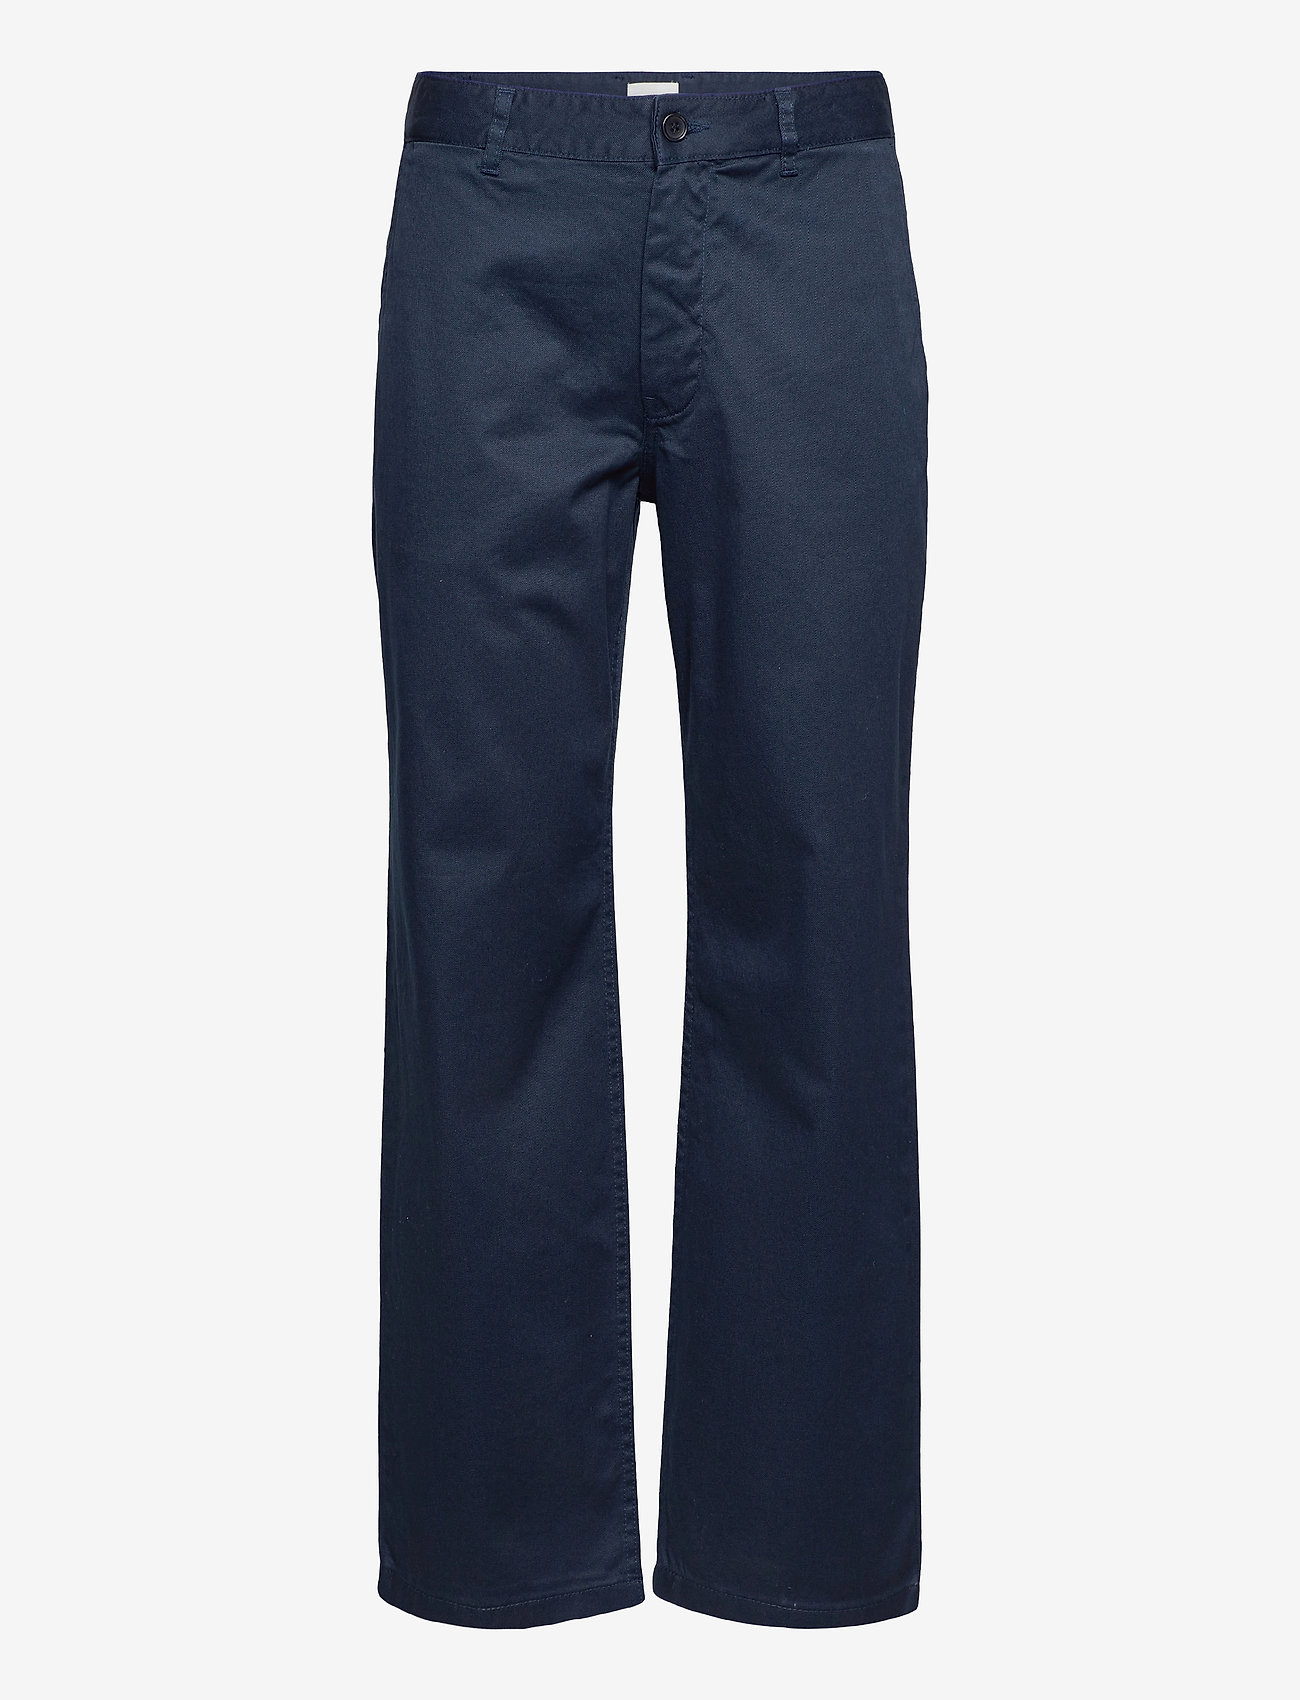 Wood Wood - Stefan classic trousers - chinot - navy - 0